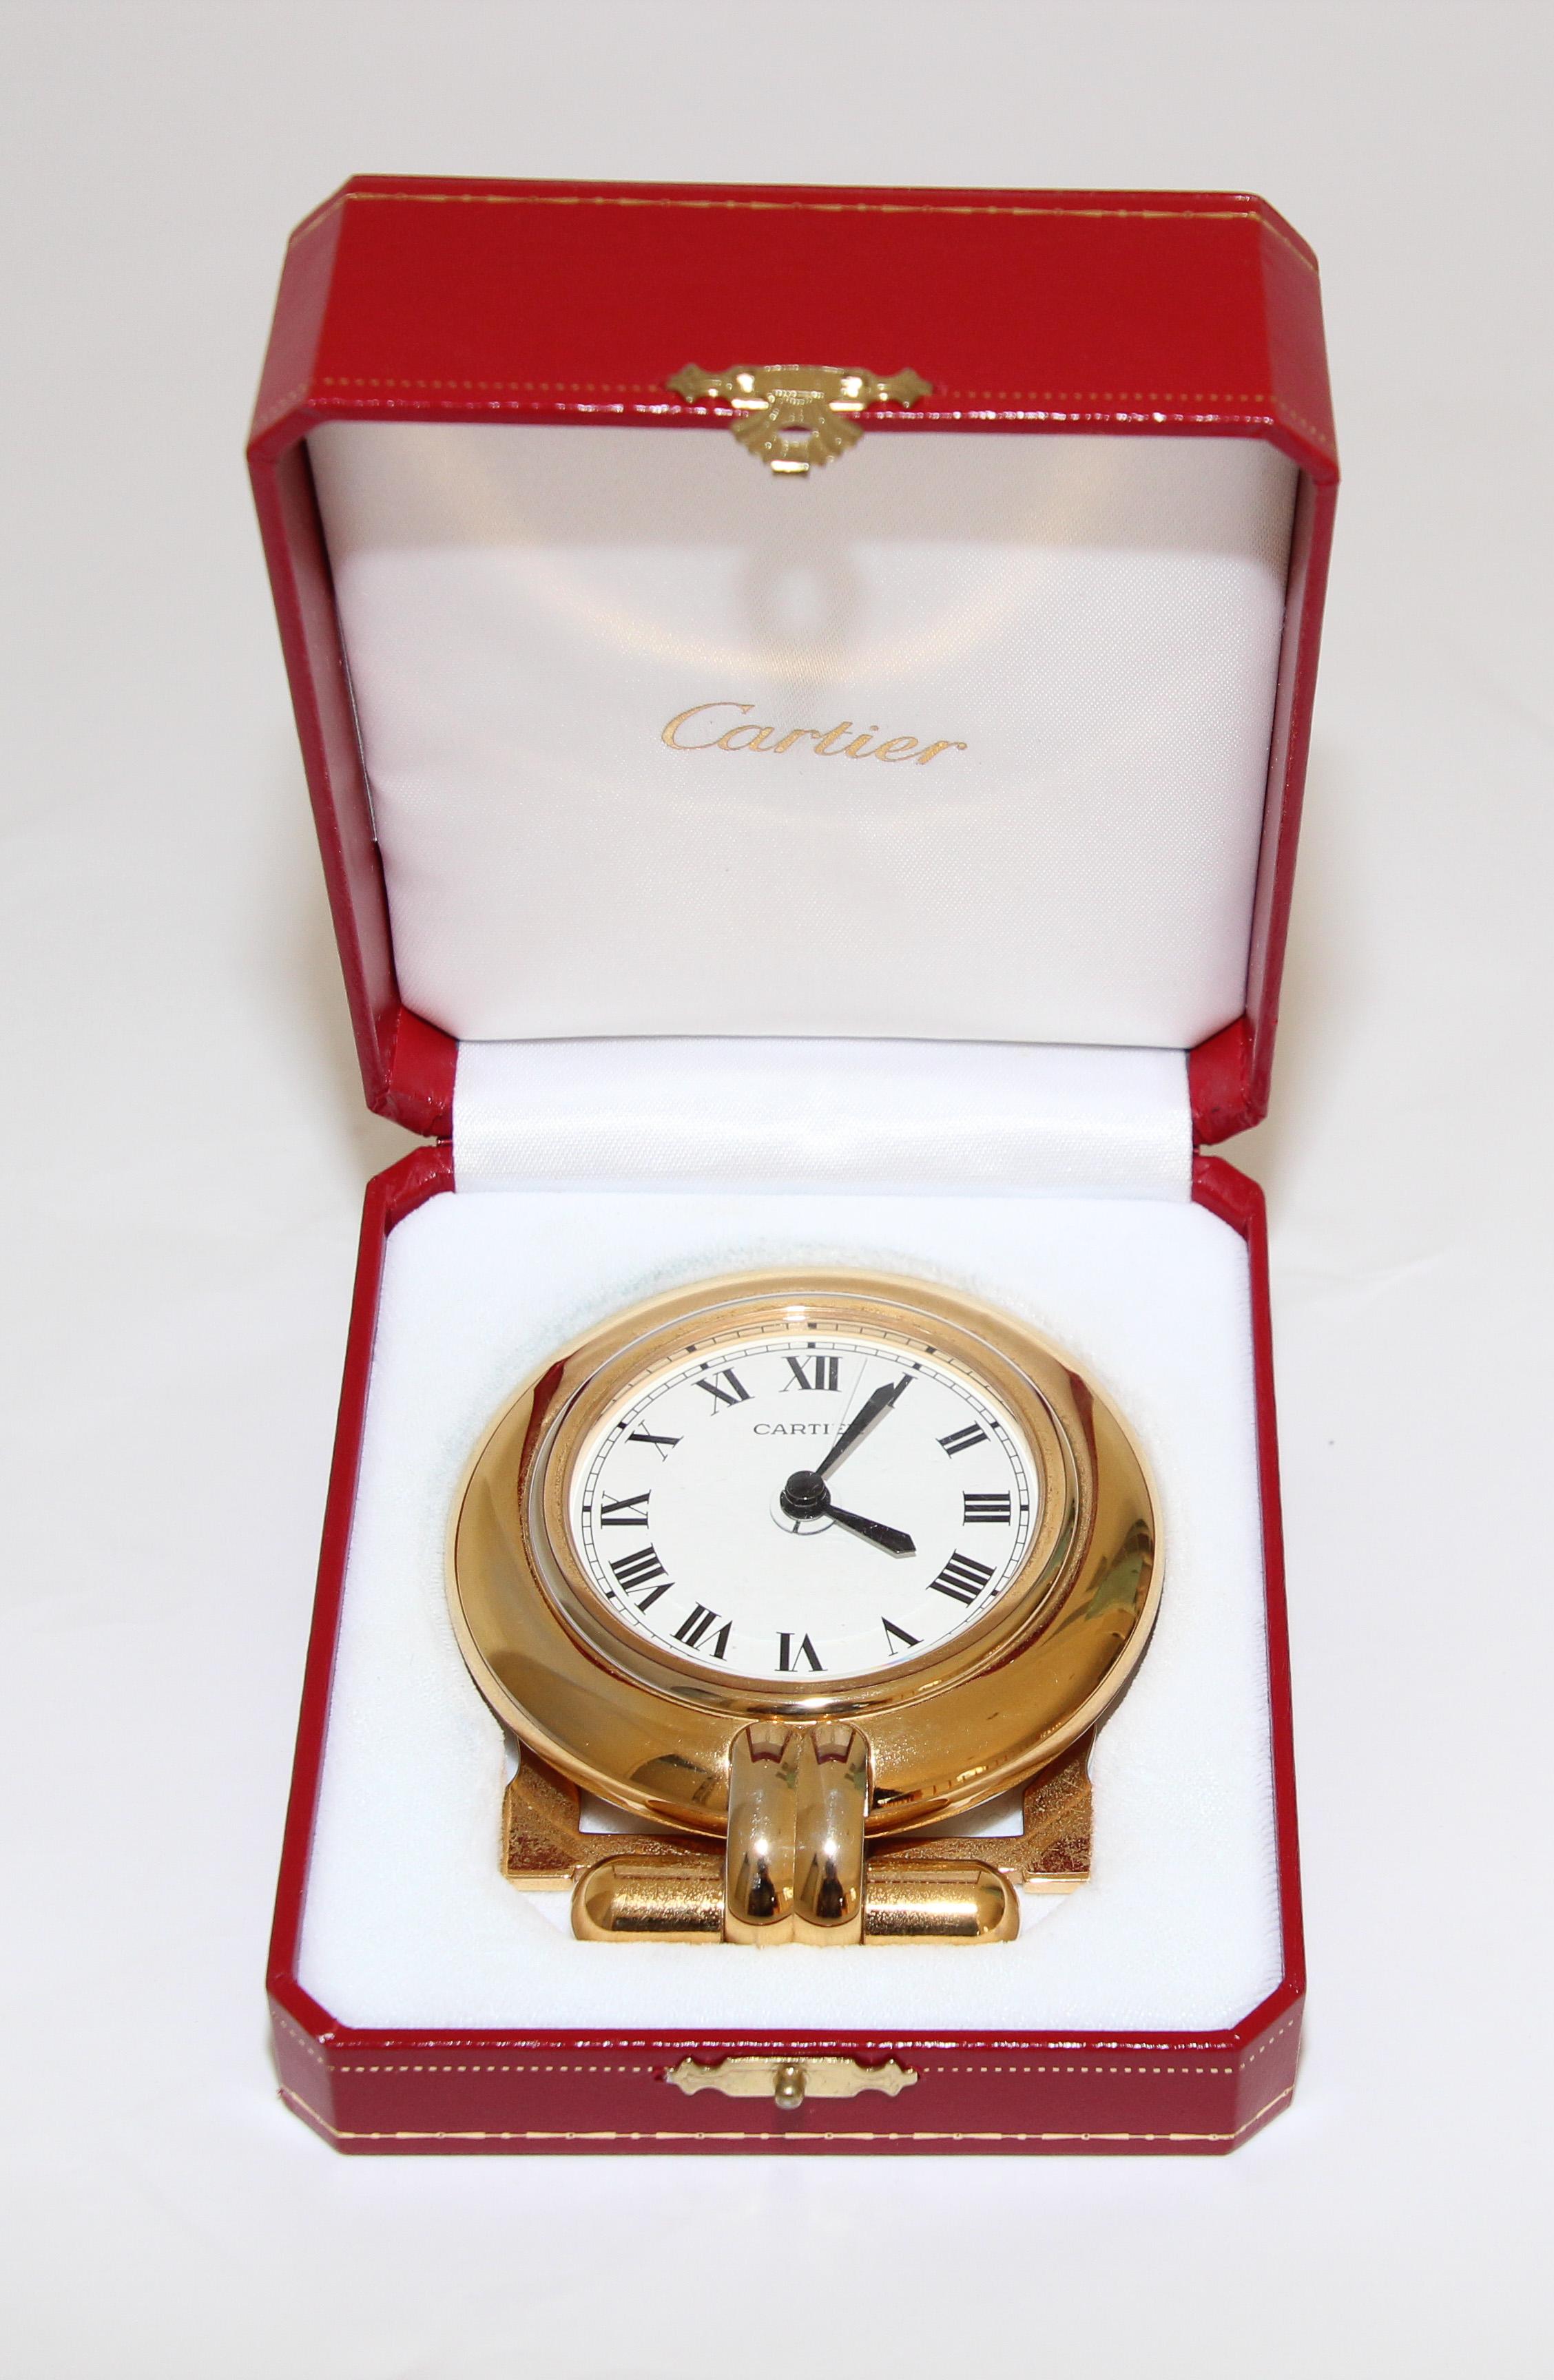 Vintage Cartier 24-karat gold-plated Art Deco travel quartz desk clock with alarm.
Cartier 24-karat gold-plated and lapis lazuli quartz travel or desk accessory clock is no longer being made.
It is vintage from the 1990s. It was originally